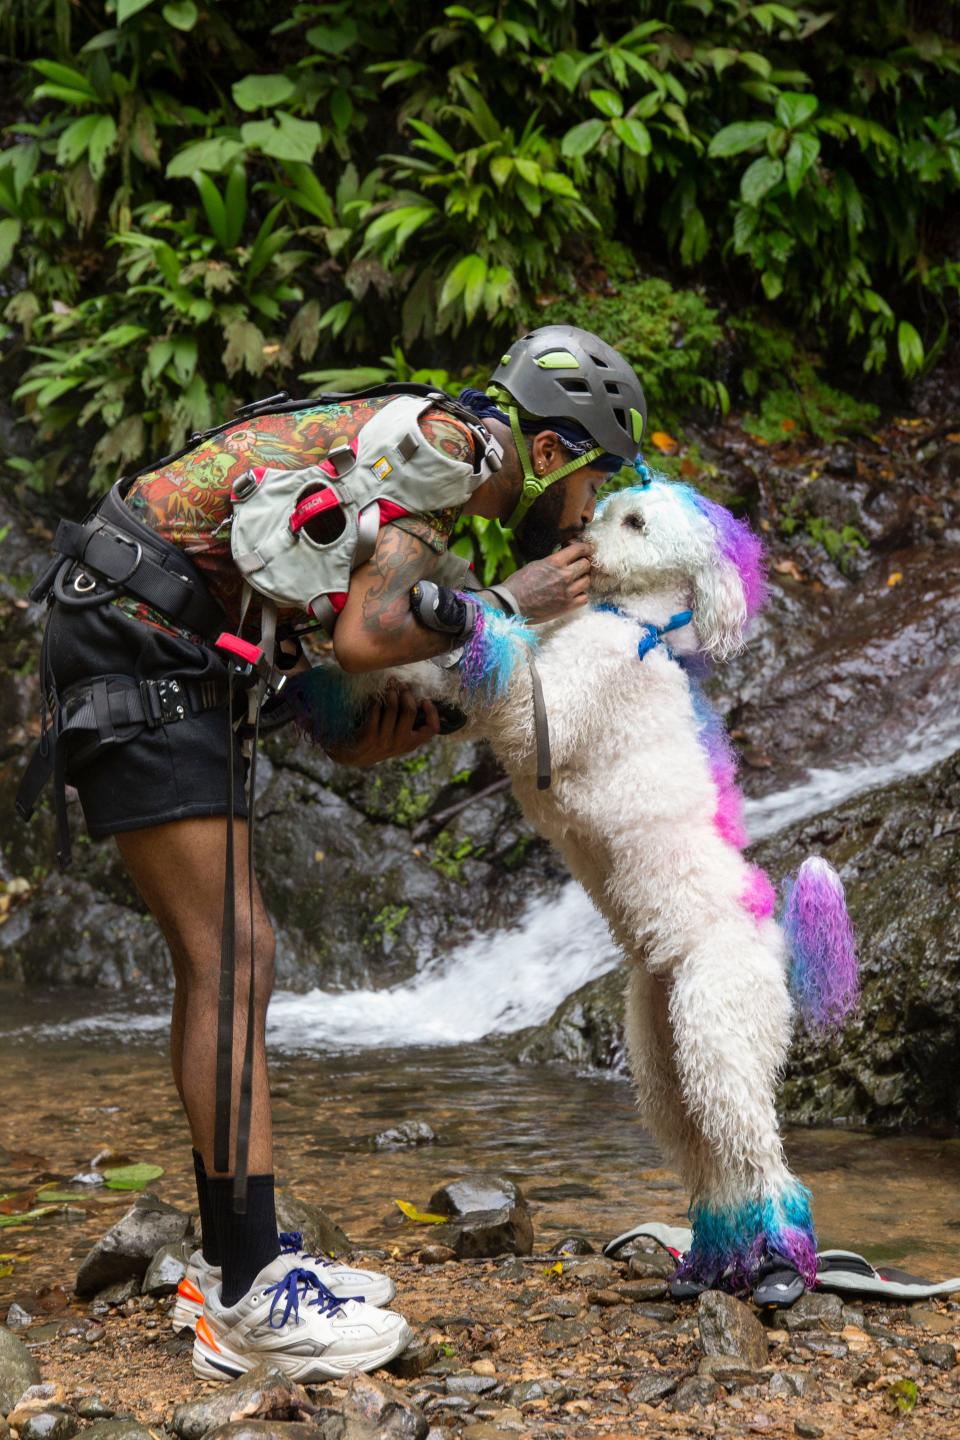 Josh White nuzzles his dog Snow, who rocks colorful fur, when the competition takes them to Costa Rica.